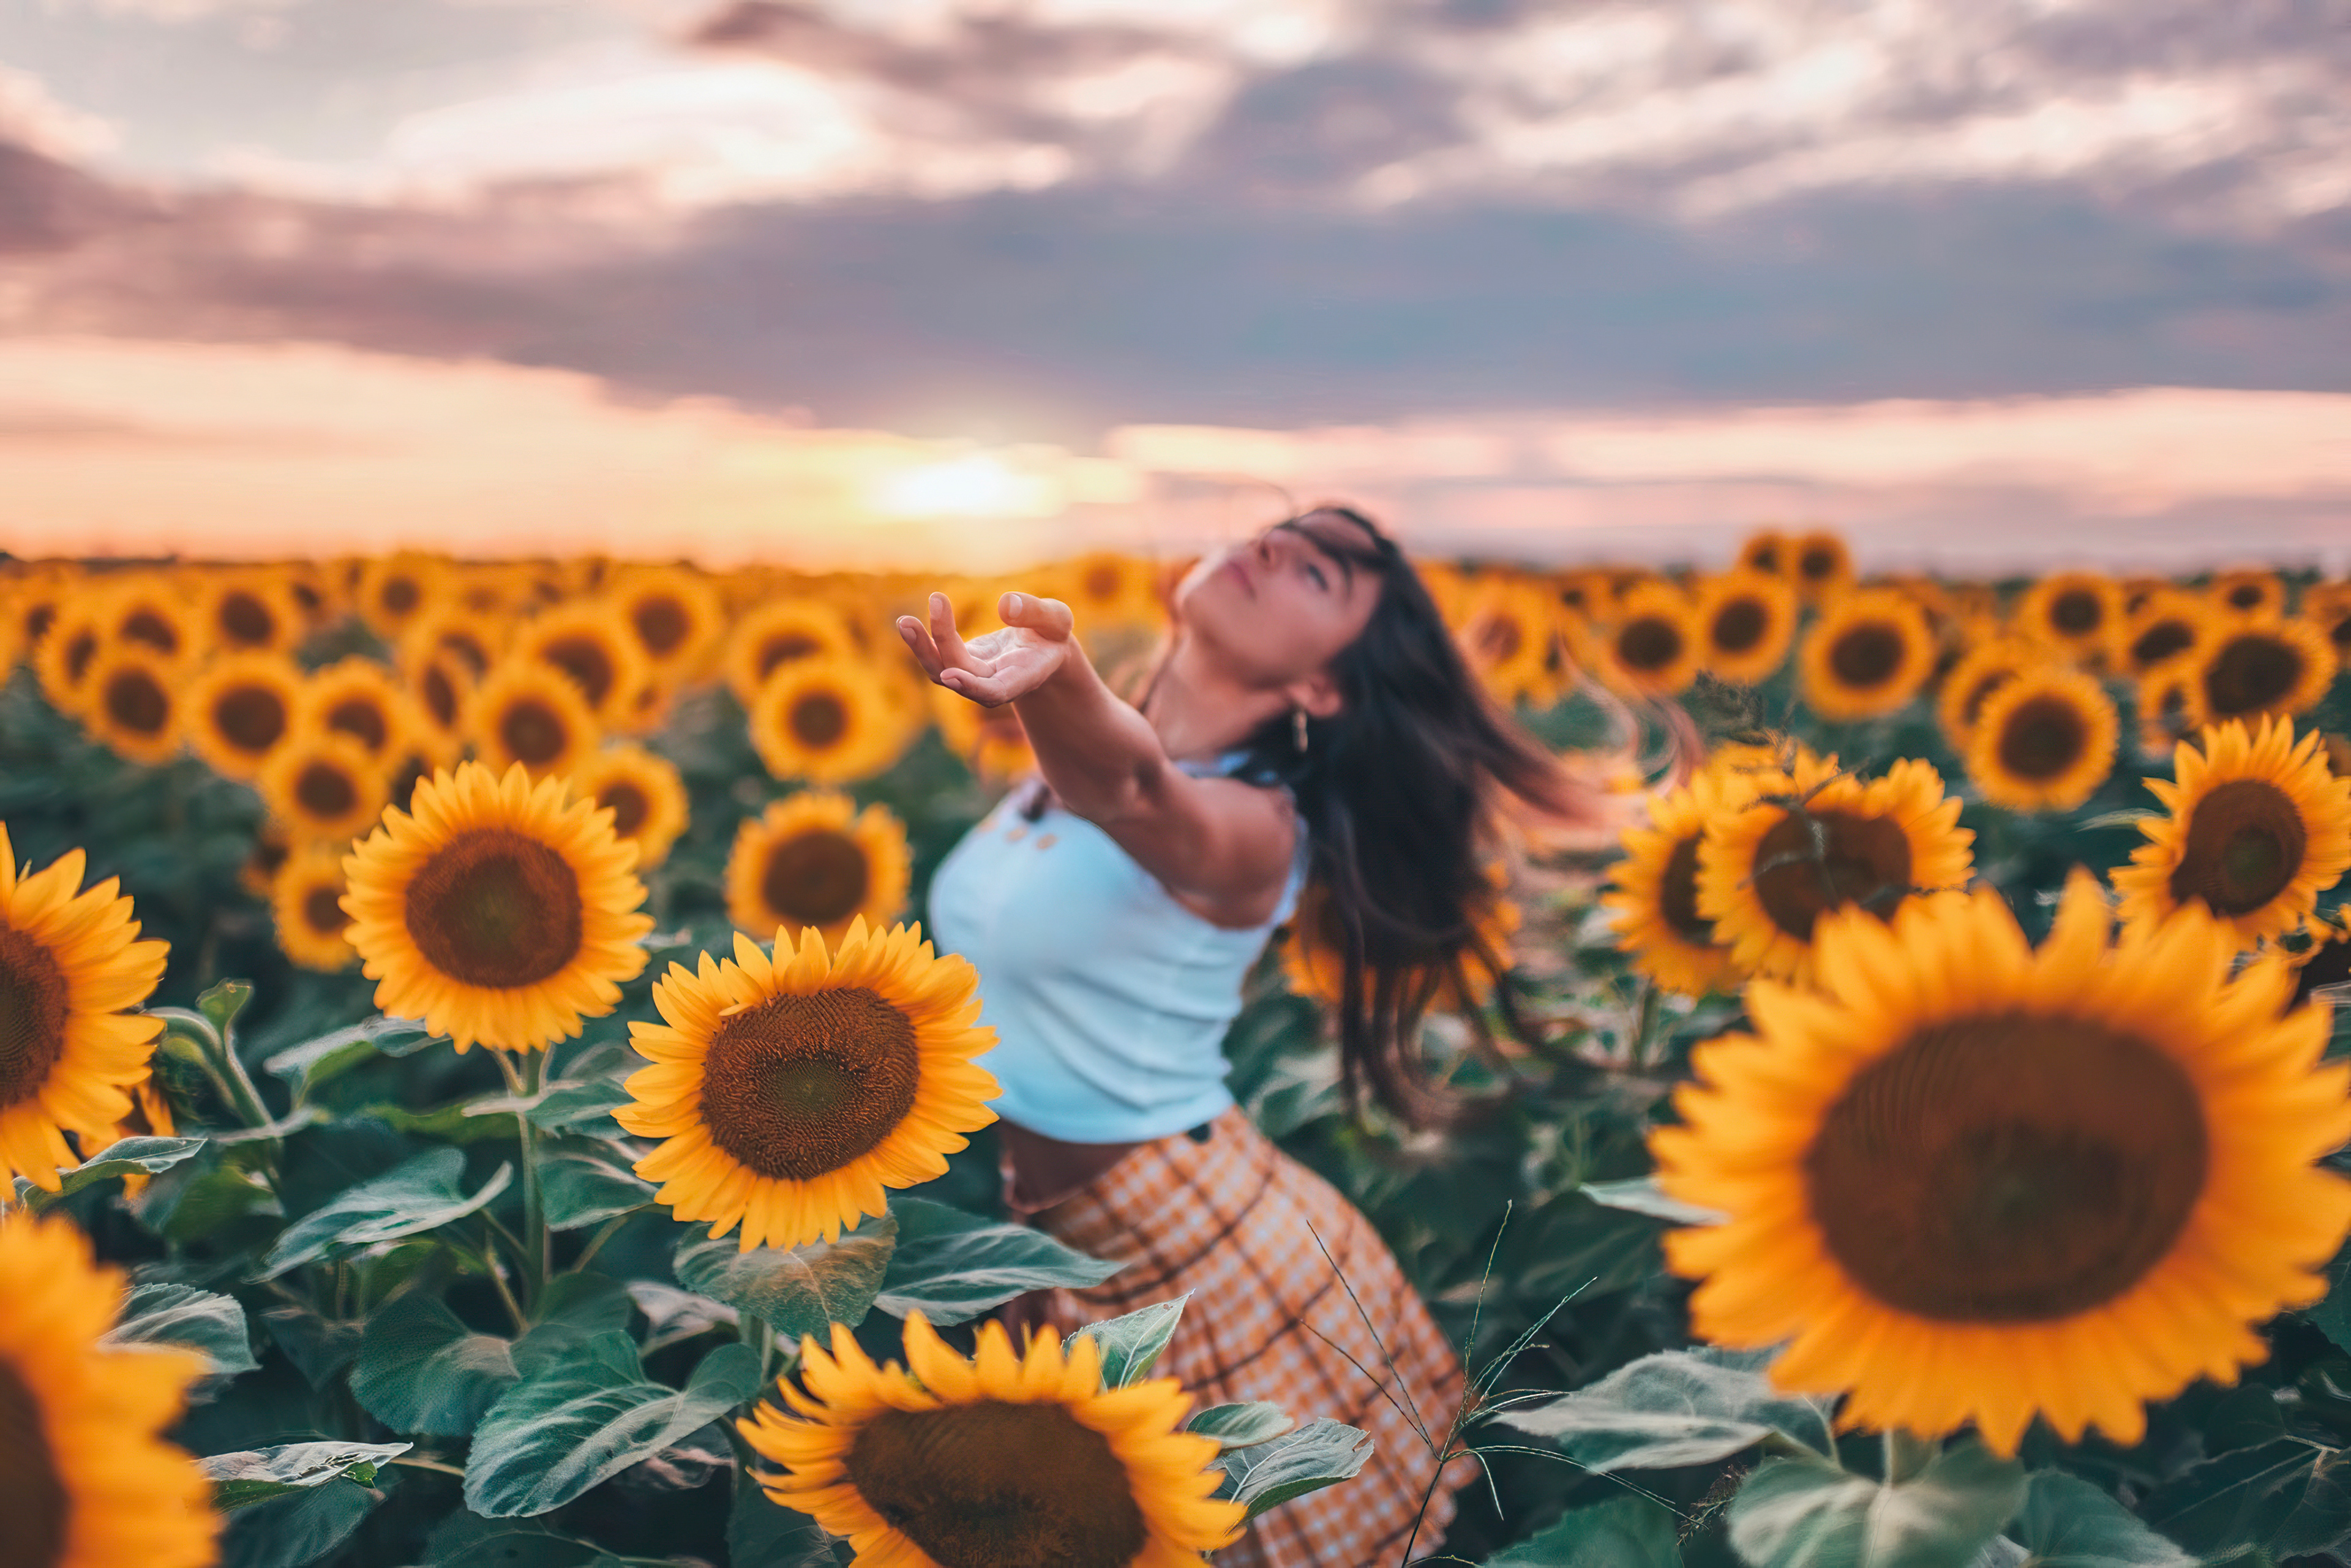 Free photo Young girl posing among sunflowers at sunset